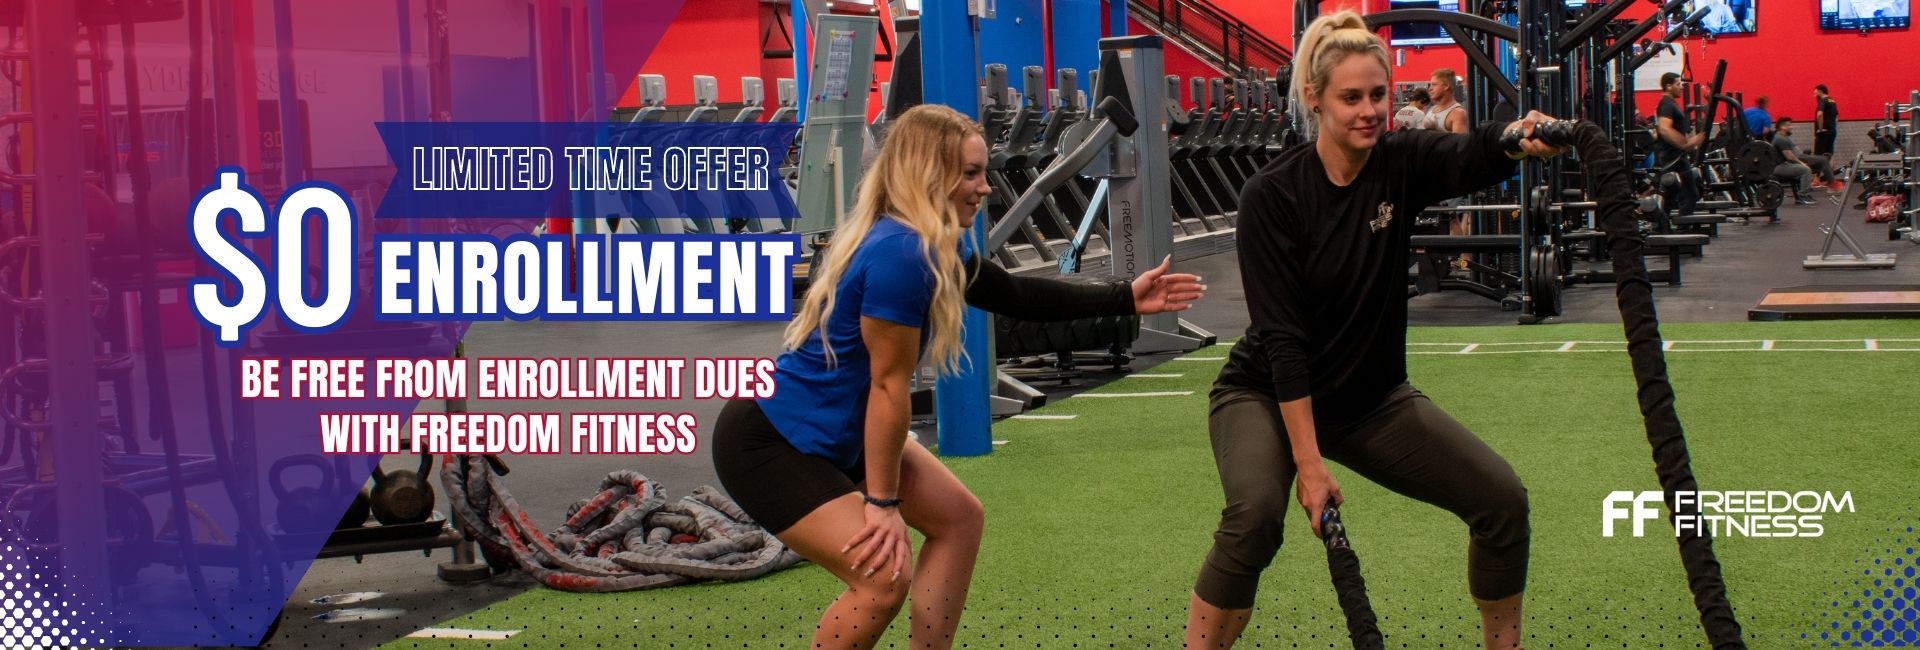 Certified private trainer in Corpus Christi Saratoga helping a gym member with a battle ropes exercise at a Freedom Fitness gym near me with a $0 Enrollment Membership offer